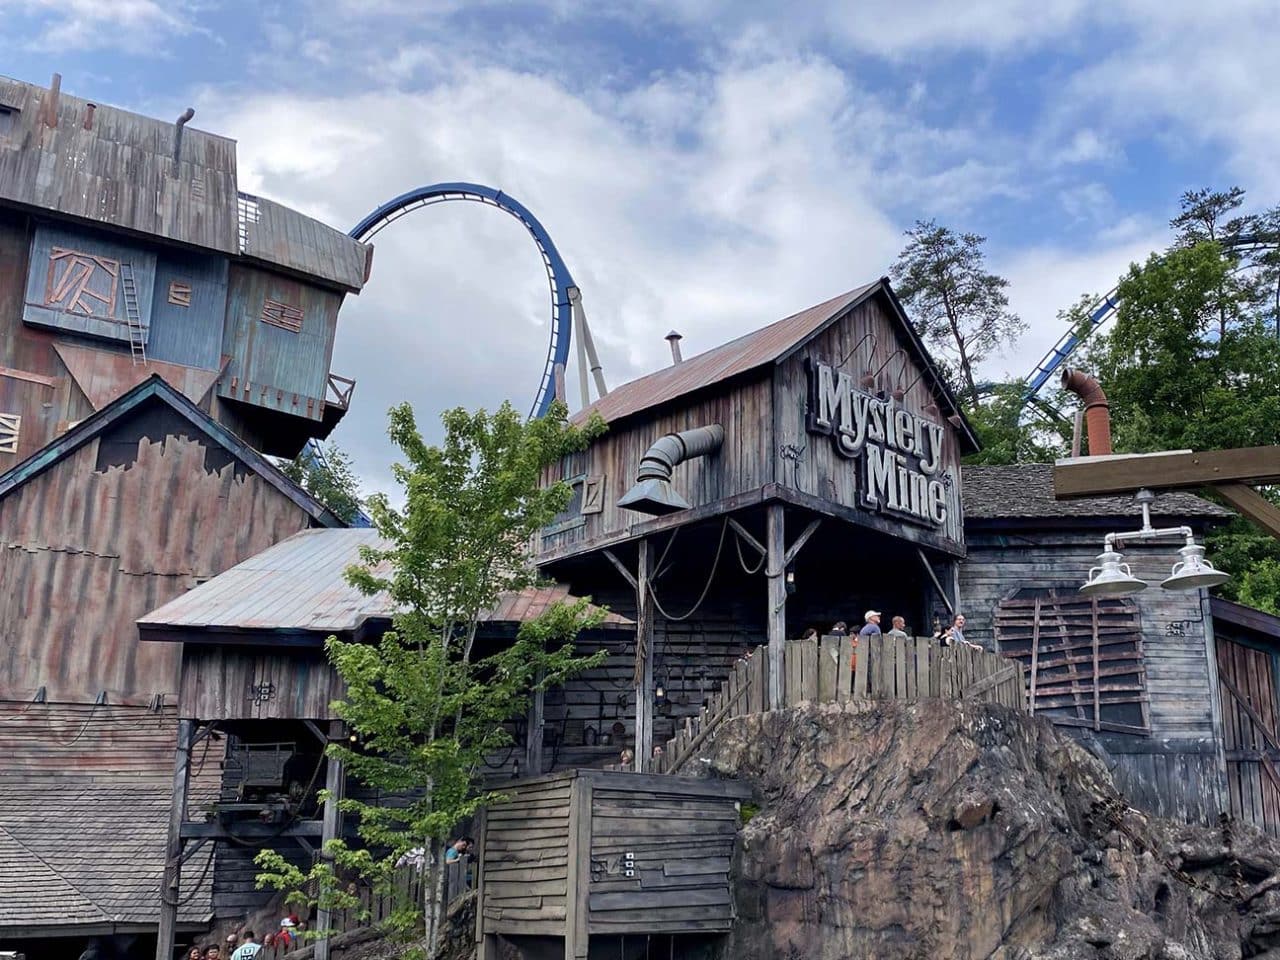 Mystery Mine takes you inside an abandoned coal mine for thrills in the dark!